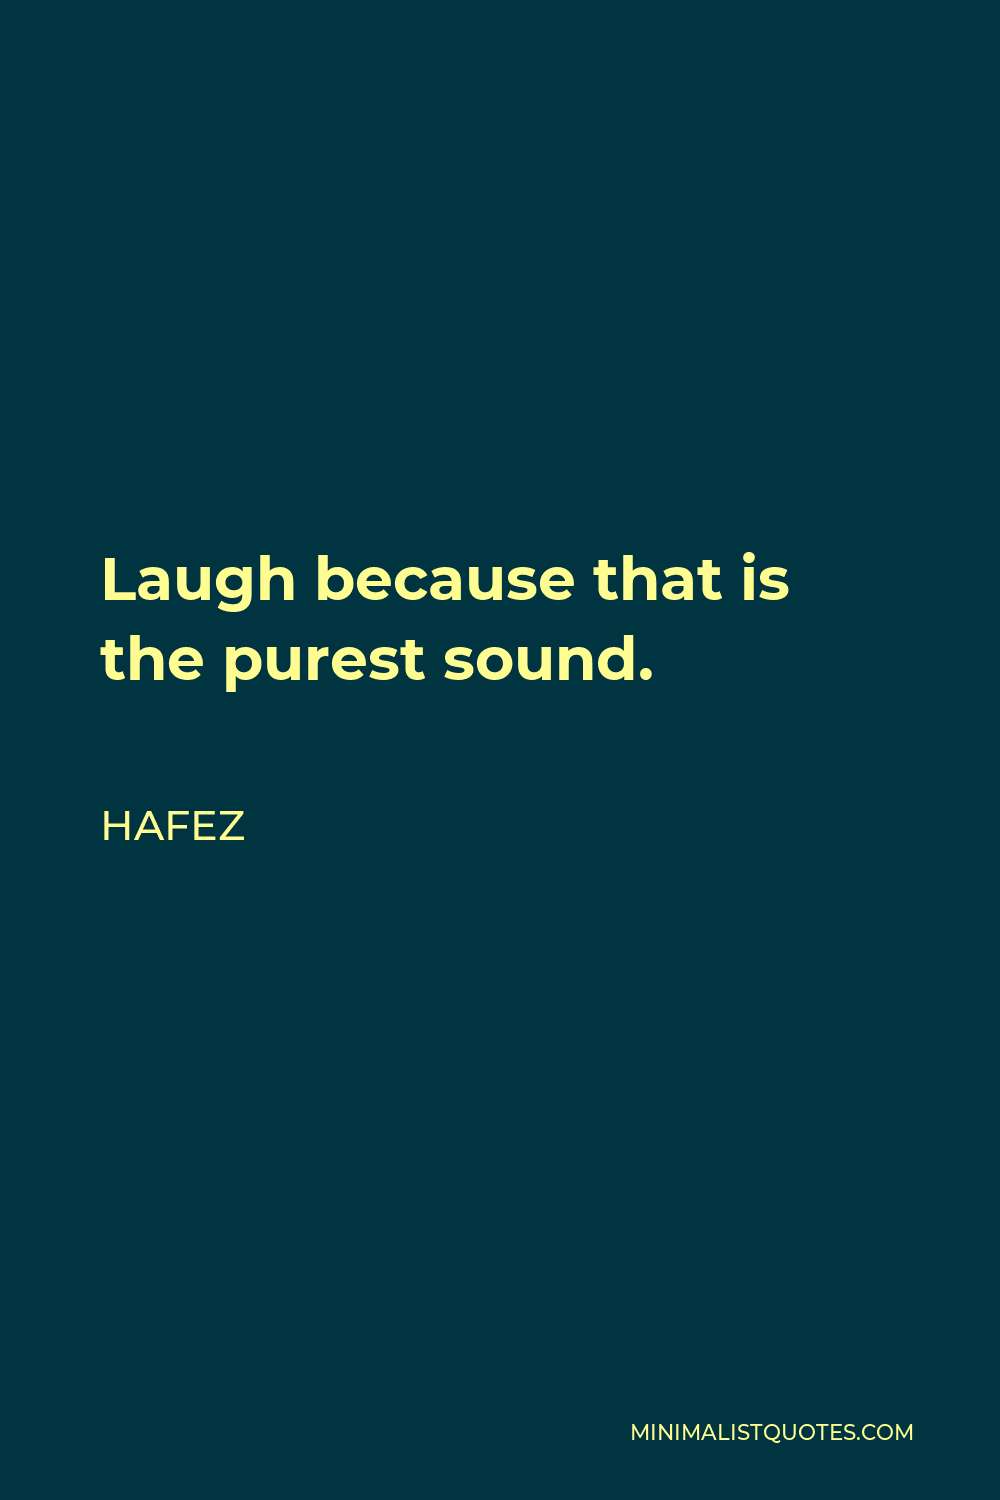 Hafez Quote - Laugh because that is the purest sound.